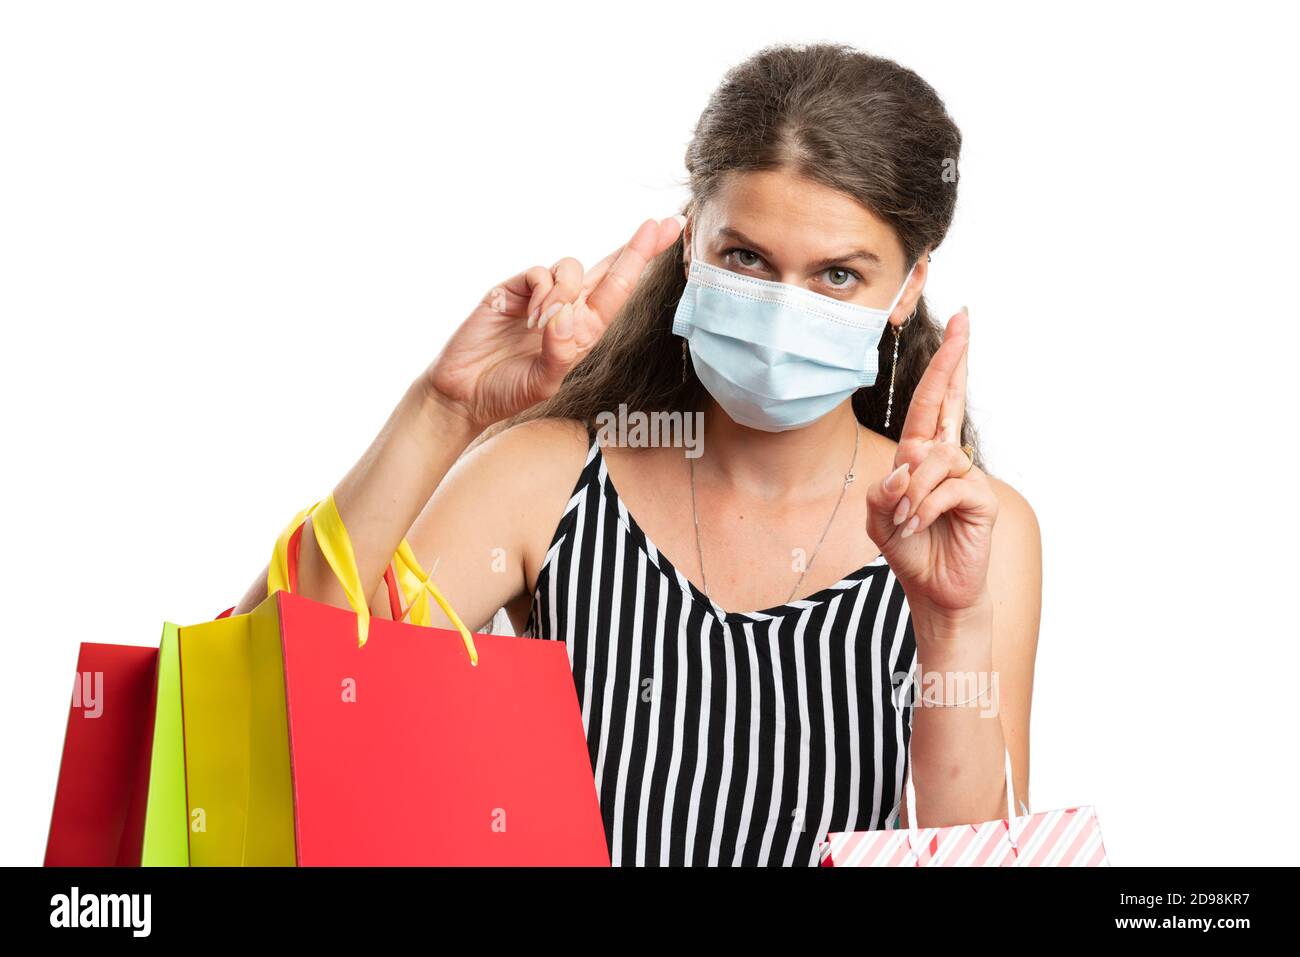 Female person wearing surgical or medical  to prevent covid19 sars virus influenza infection making double fingers crossed good luck gesture holding c Stock Photo